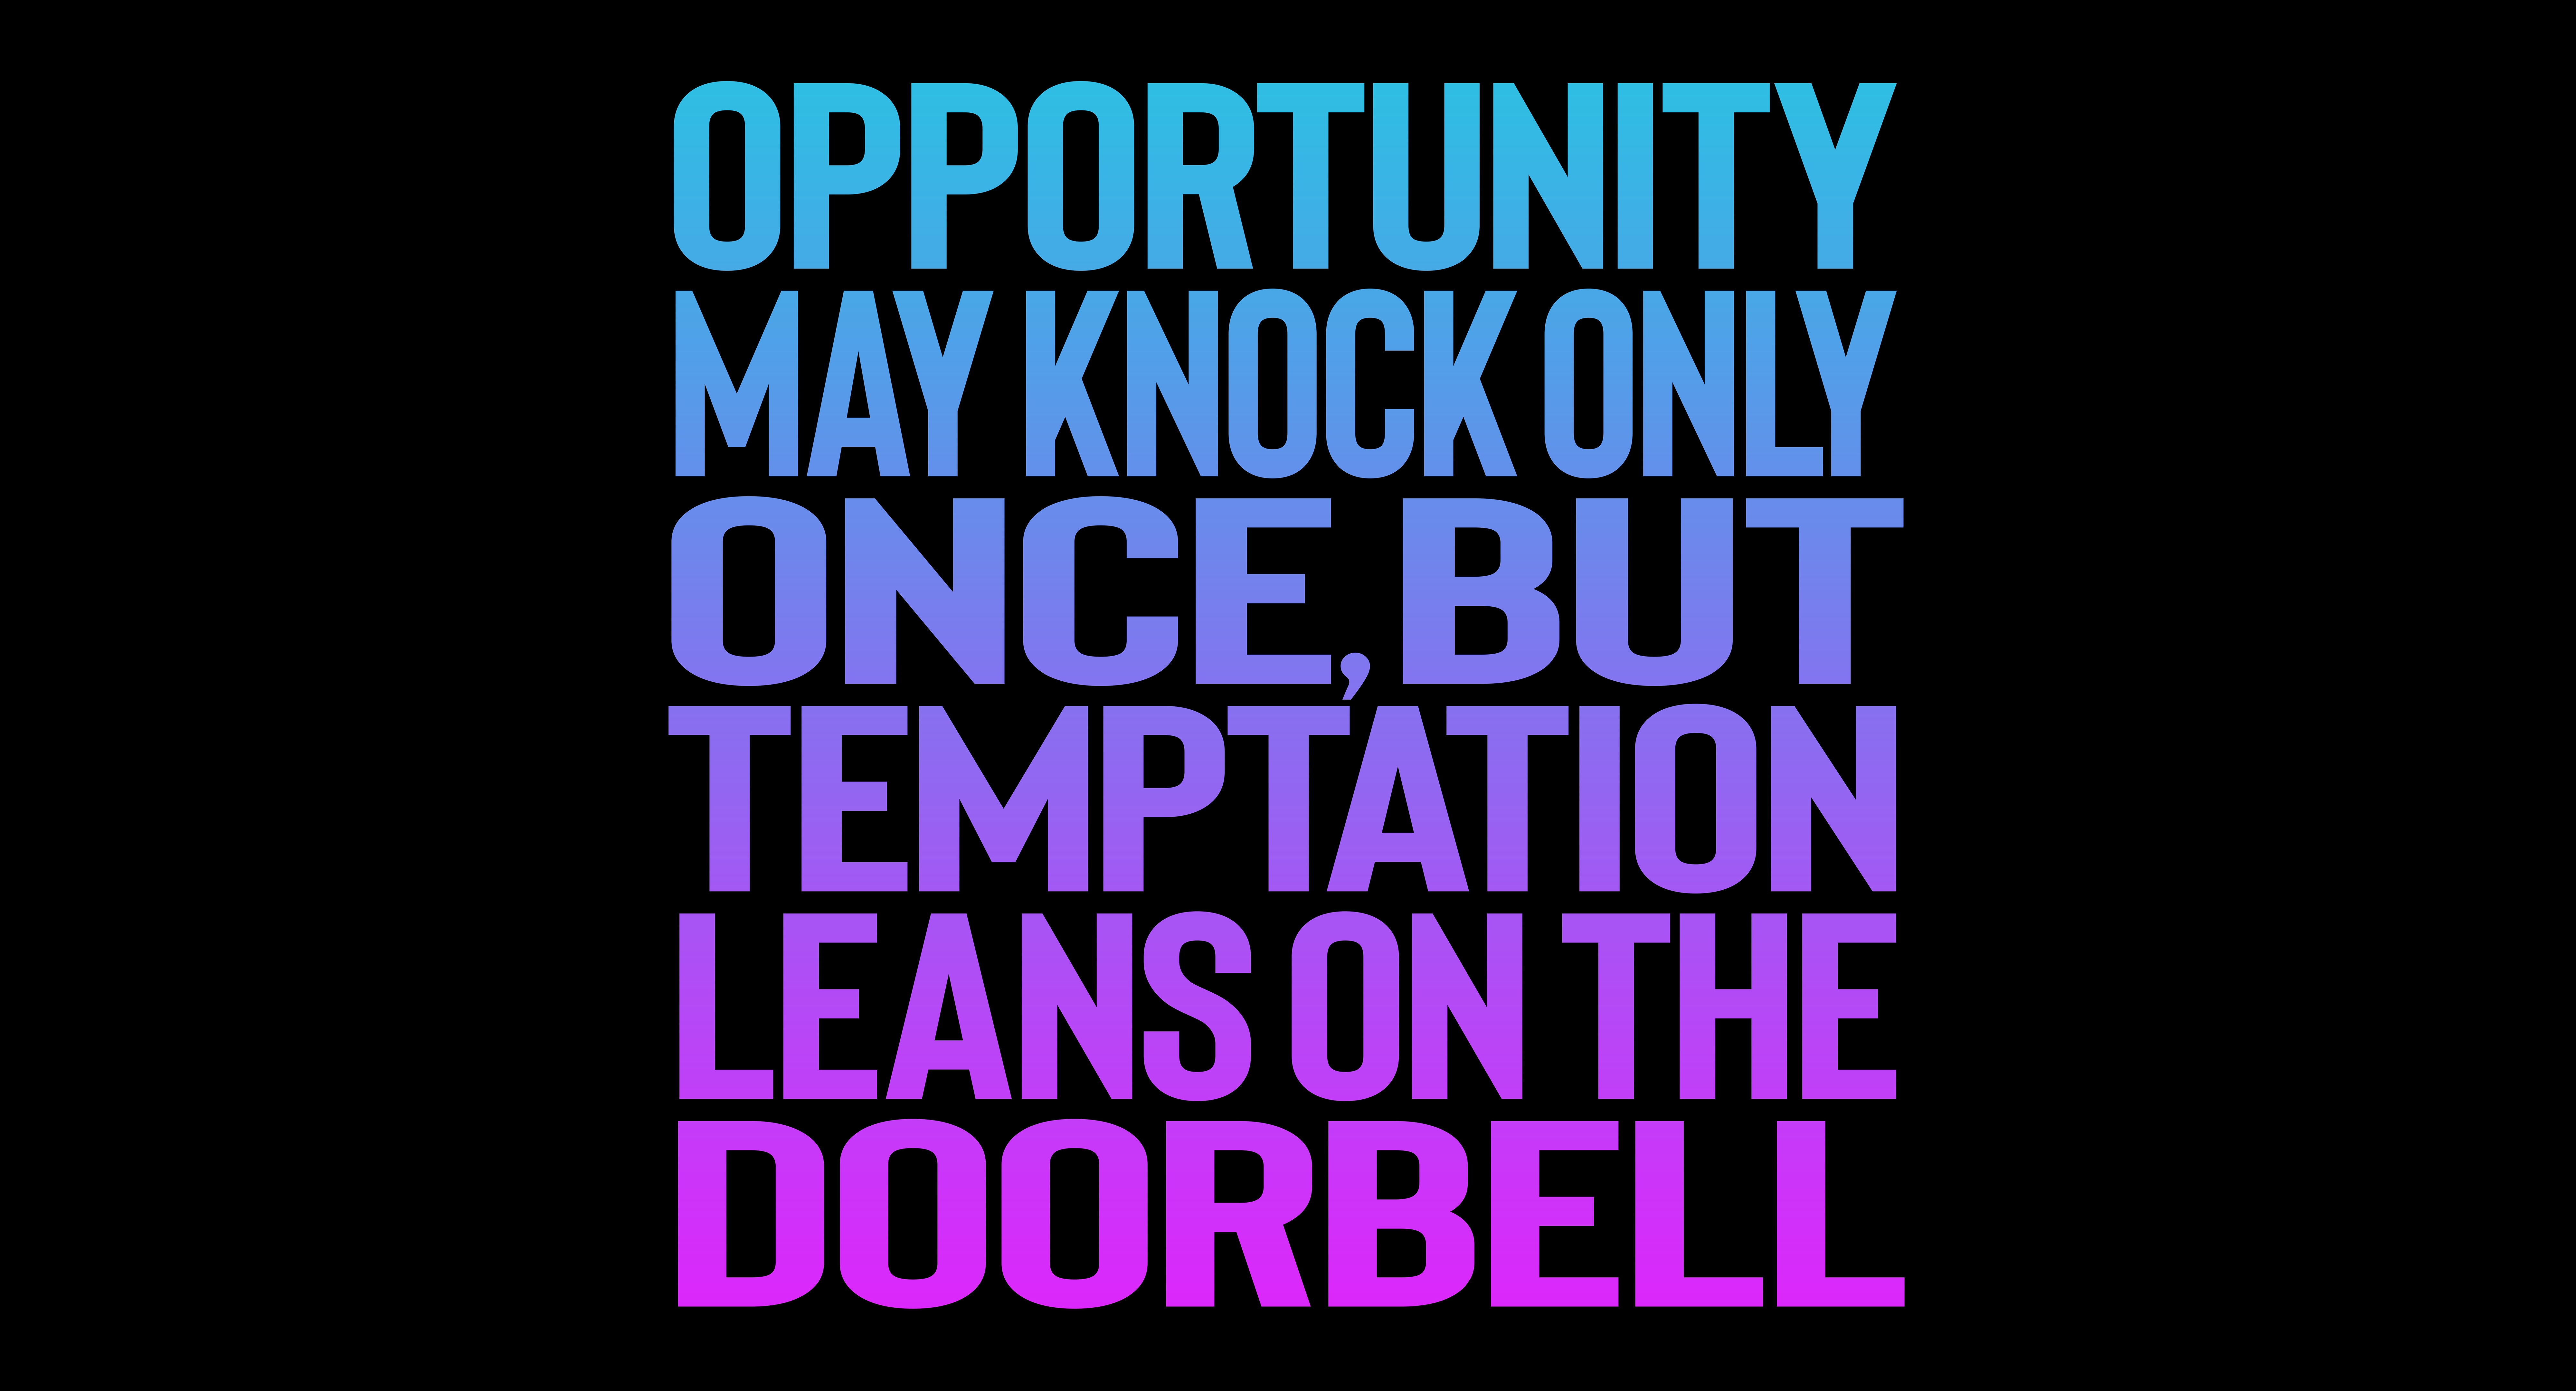 HD wallpaper, Opportunity May Knock Only Once, Popular Quotes, 8K, Amoled, But Temptation Leans On The Doorbell, Black Background, , 5K